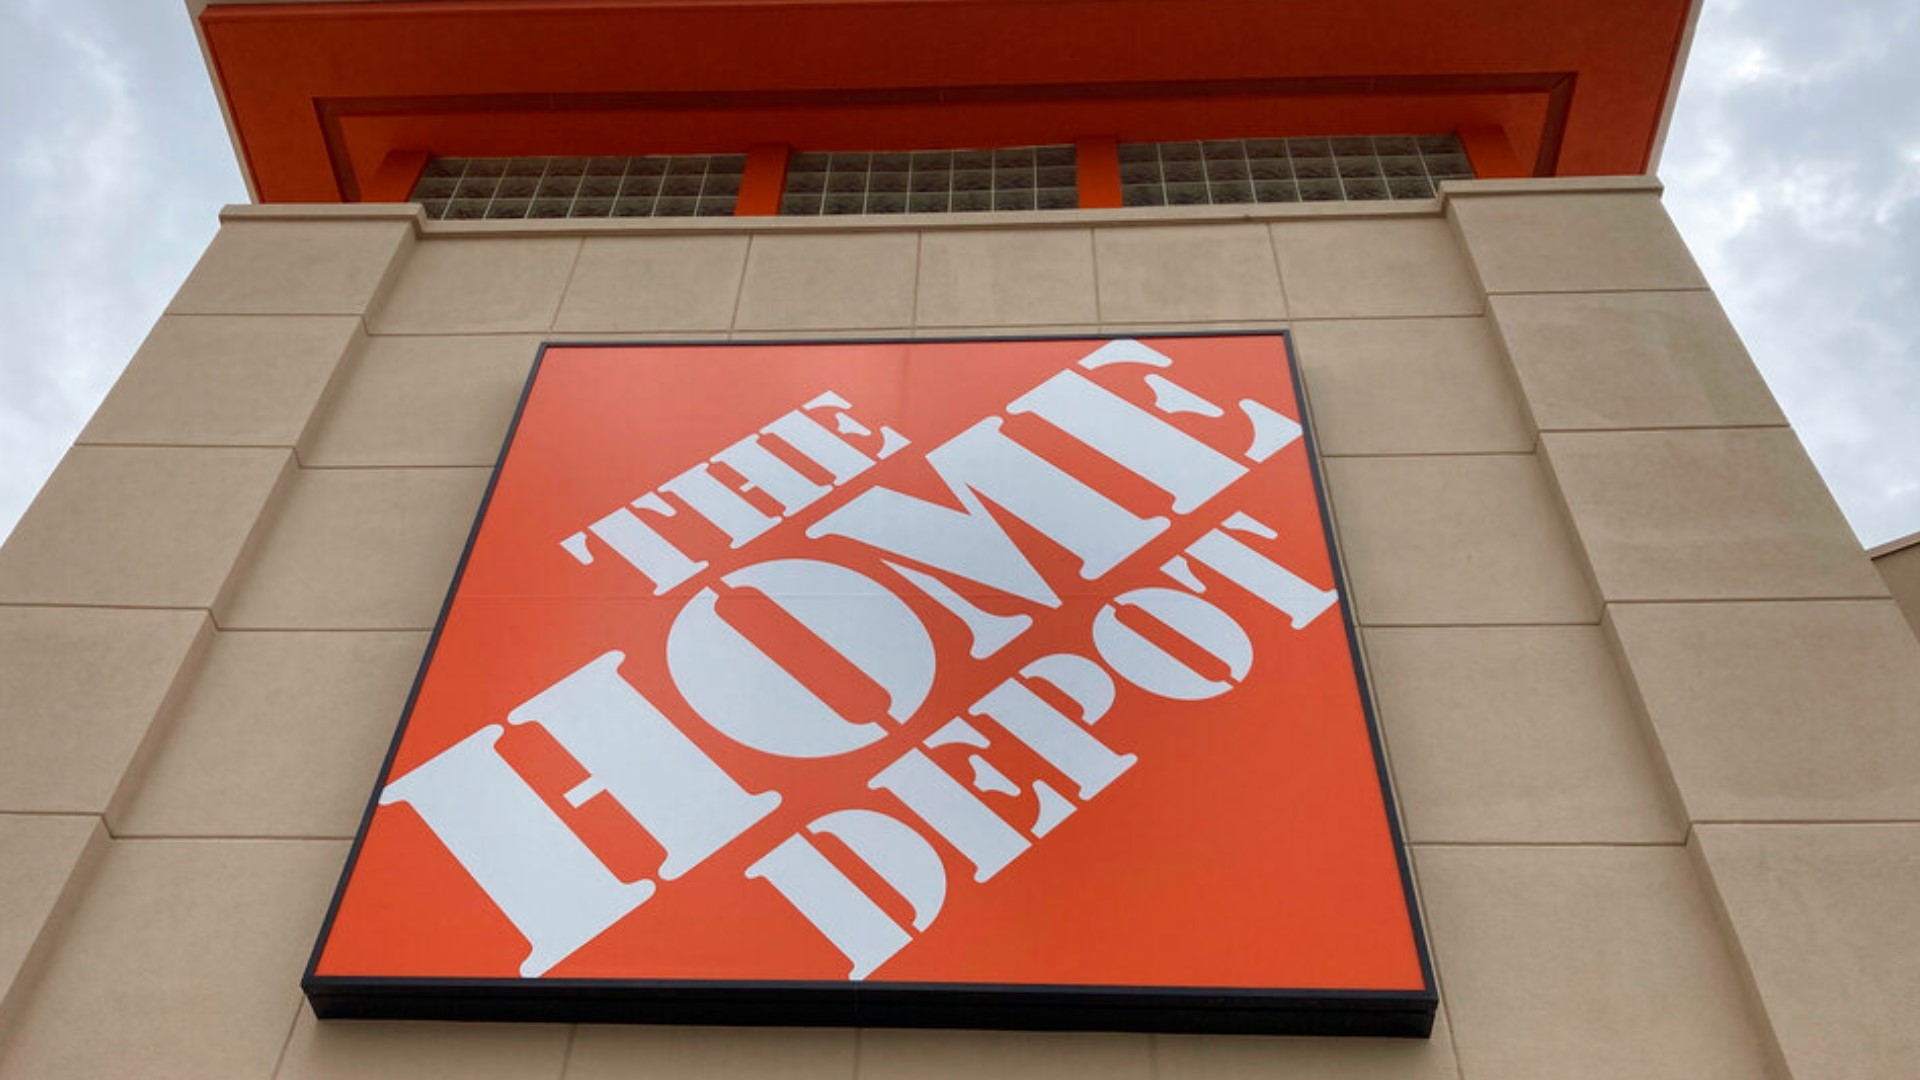 Urban Home Depot Stores, Most locations of The Home Depot I…